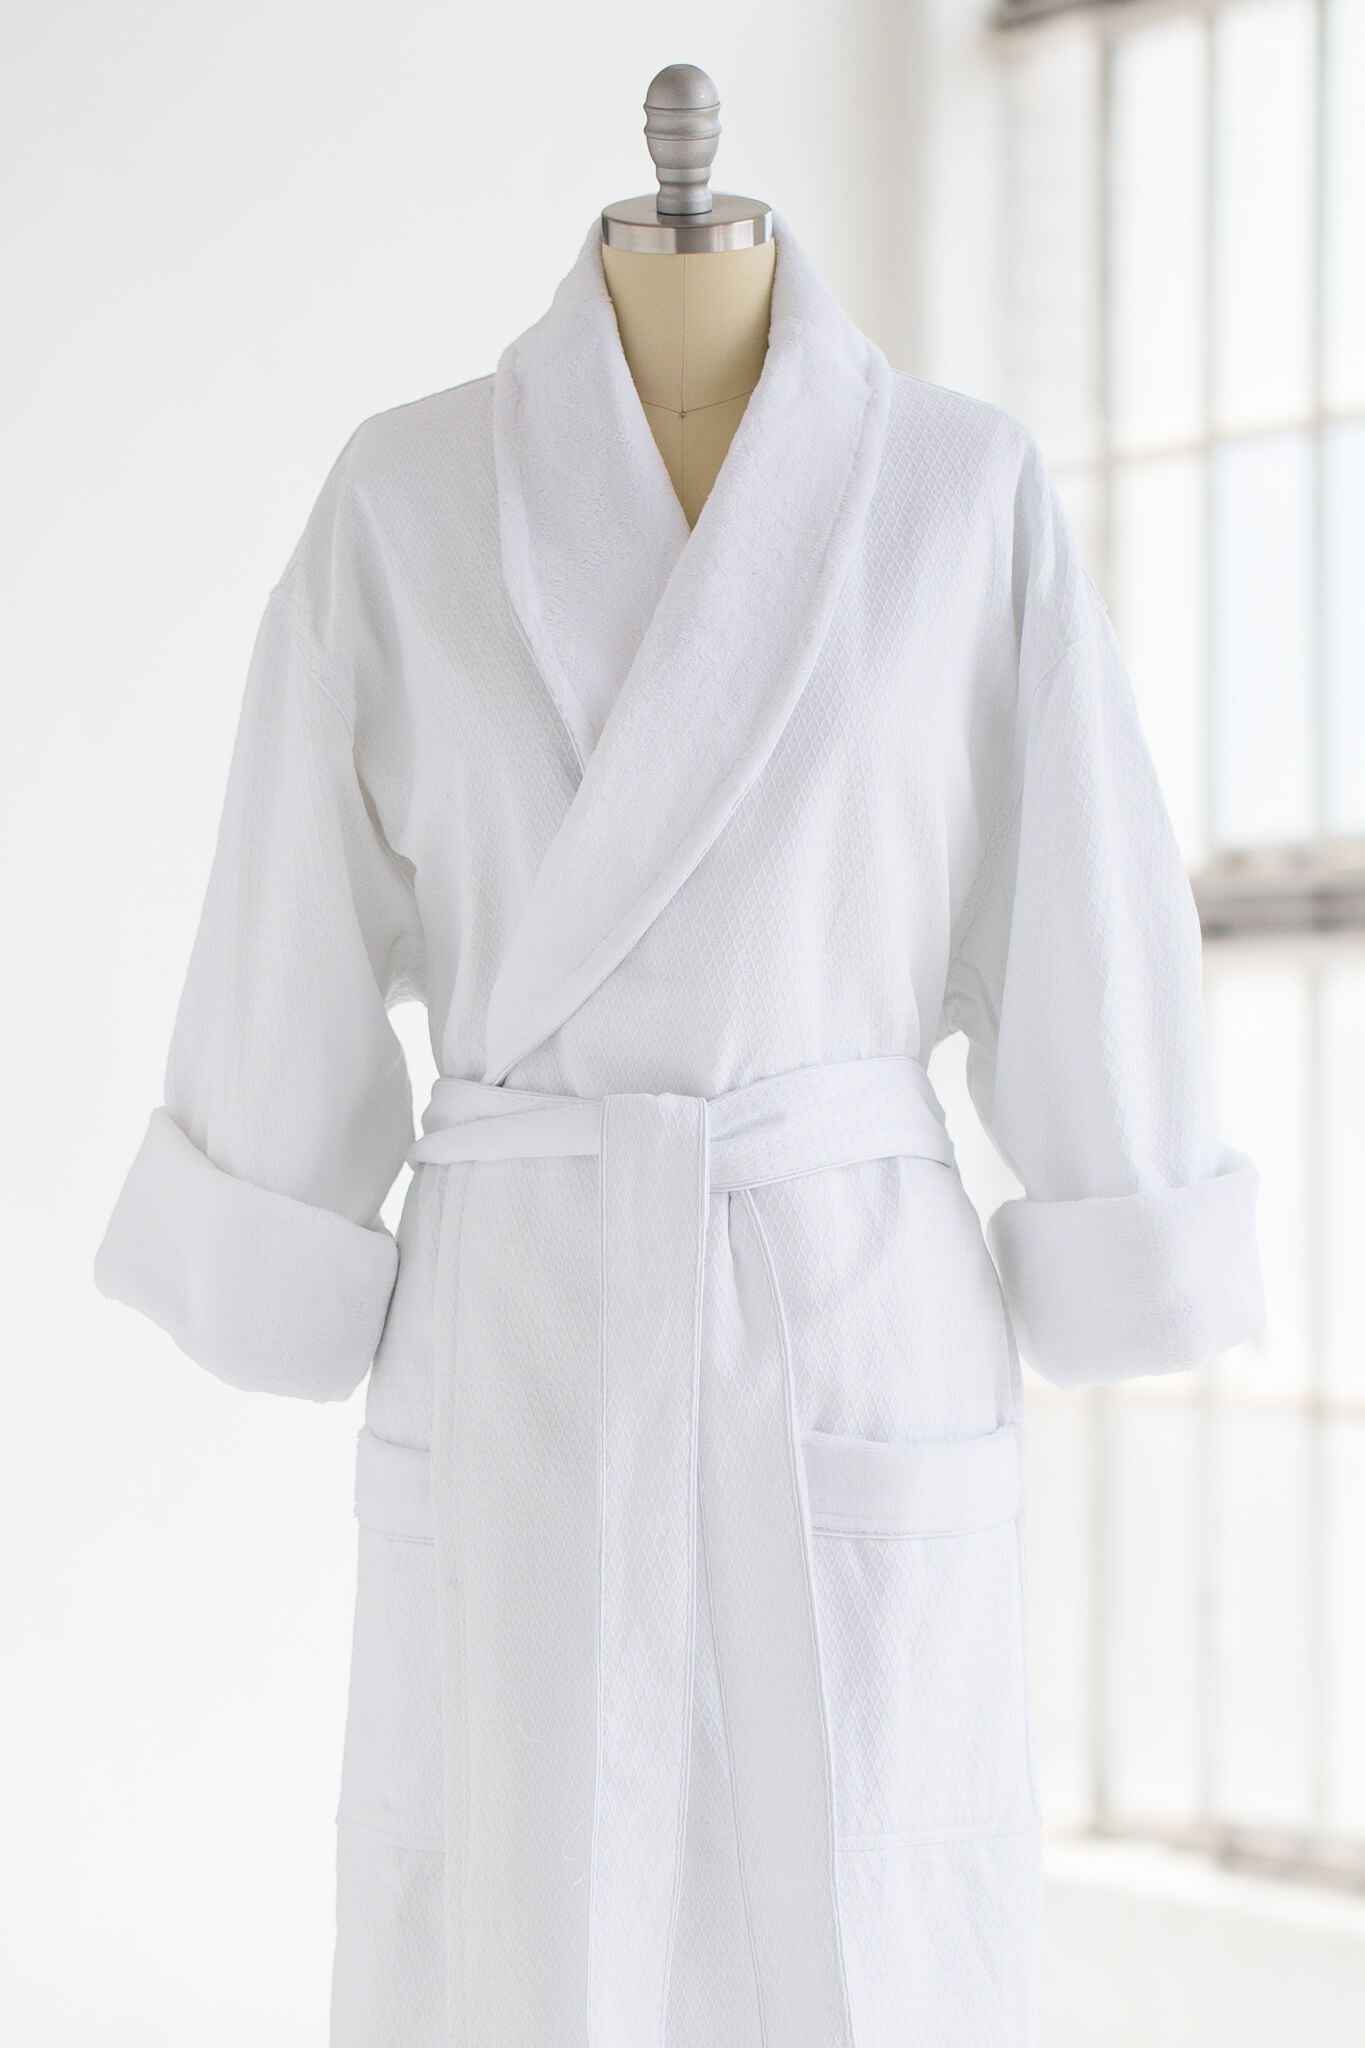 Elegant And Beautiful Robes For Women │ Luxury Spa Robes Luxury Spa Robes